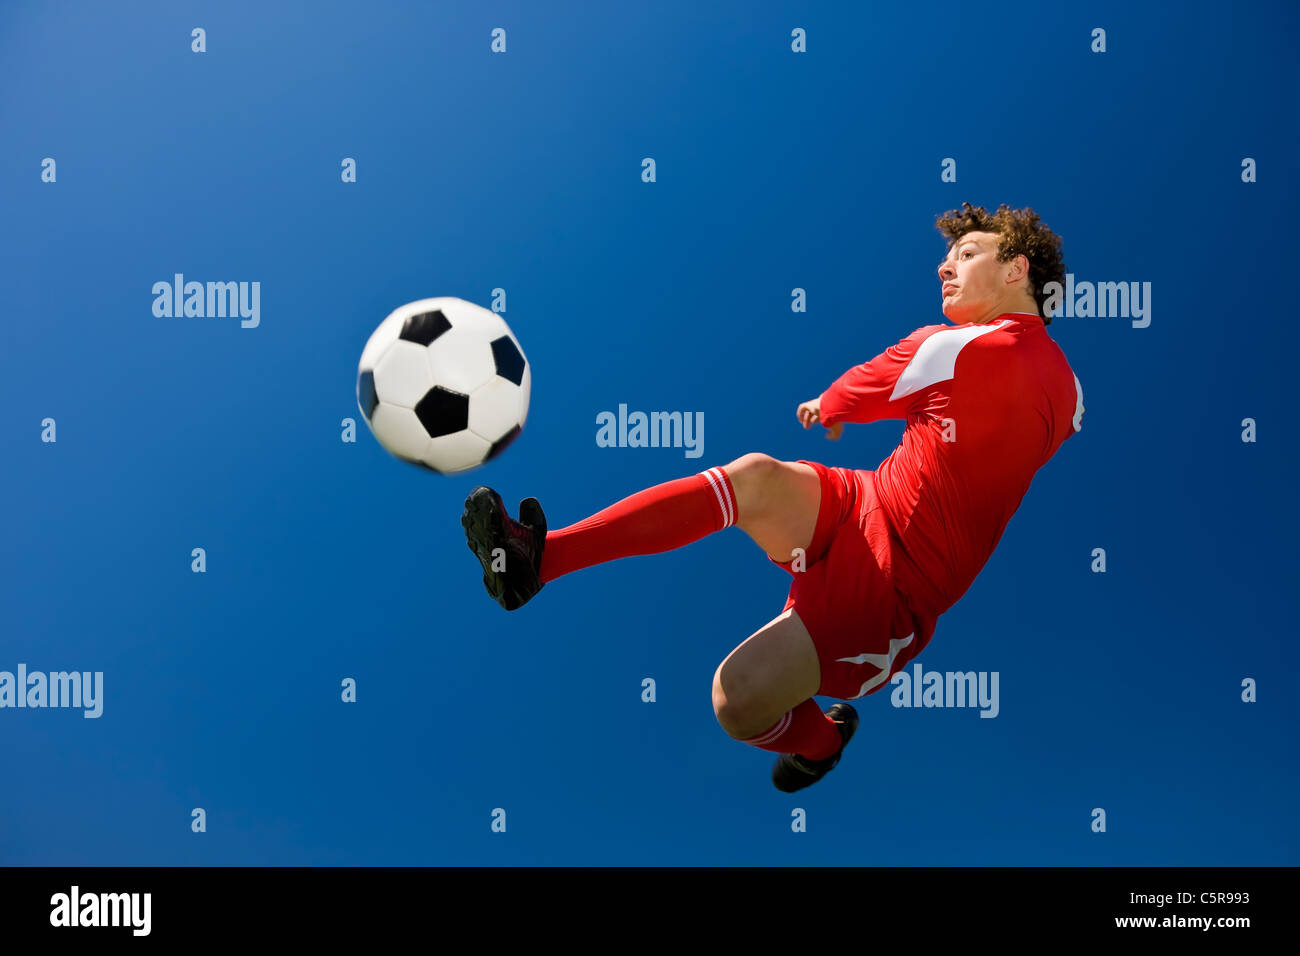 A soccer player volleys a ball in mid air. Stock Photo